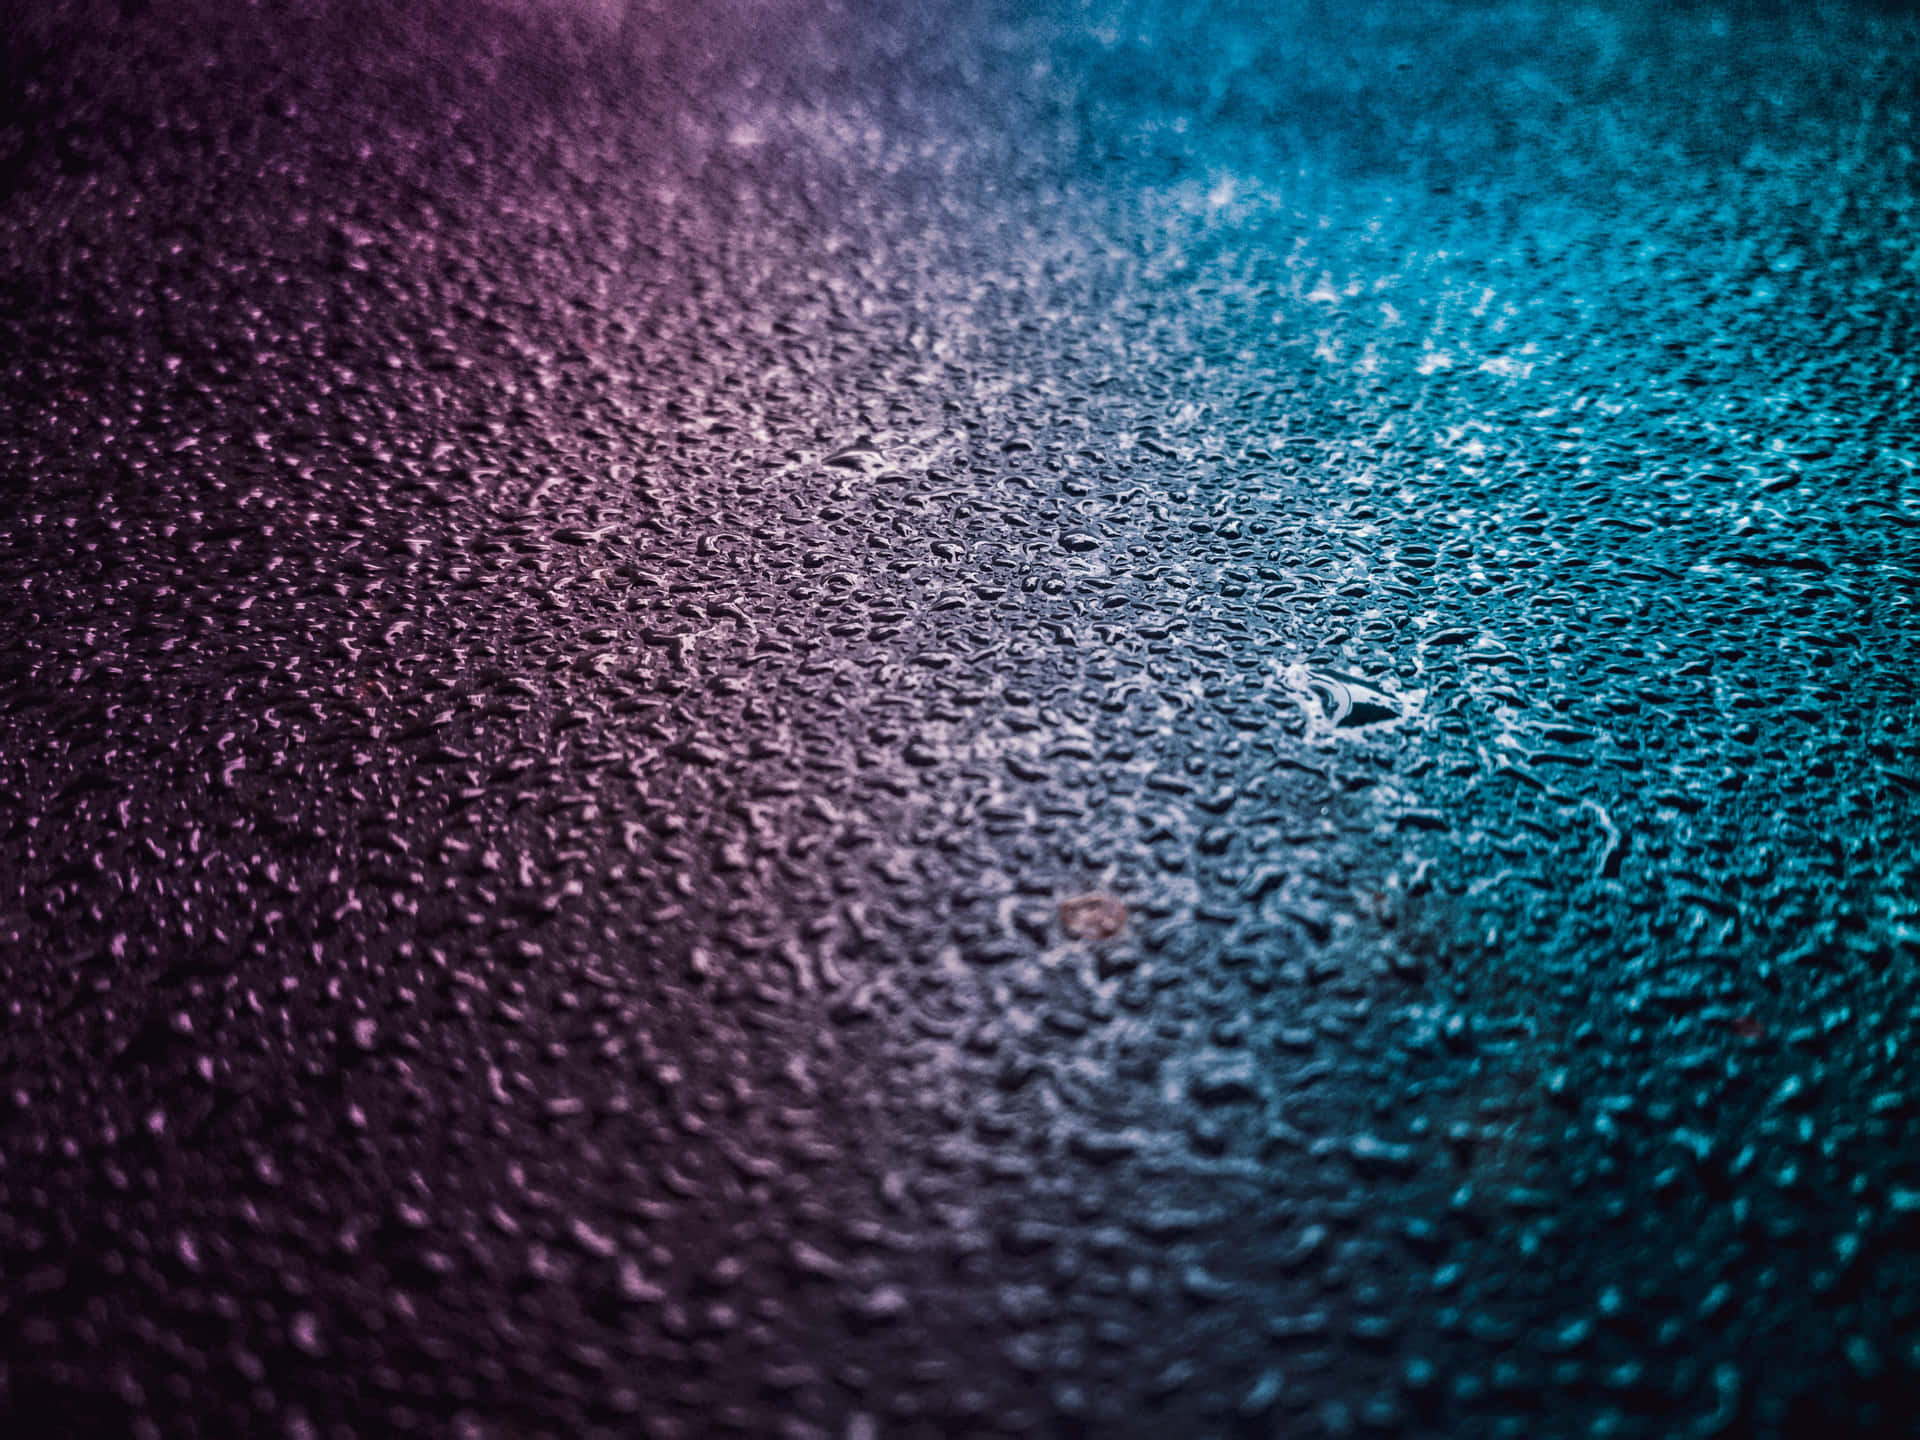 Possible Pavement Texture Wallpaper